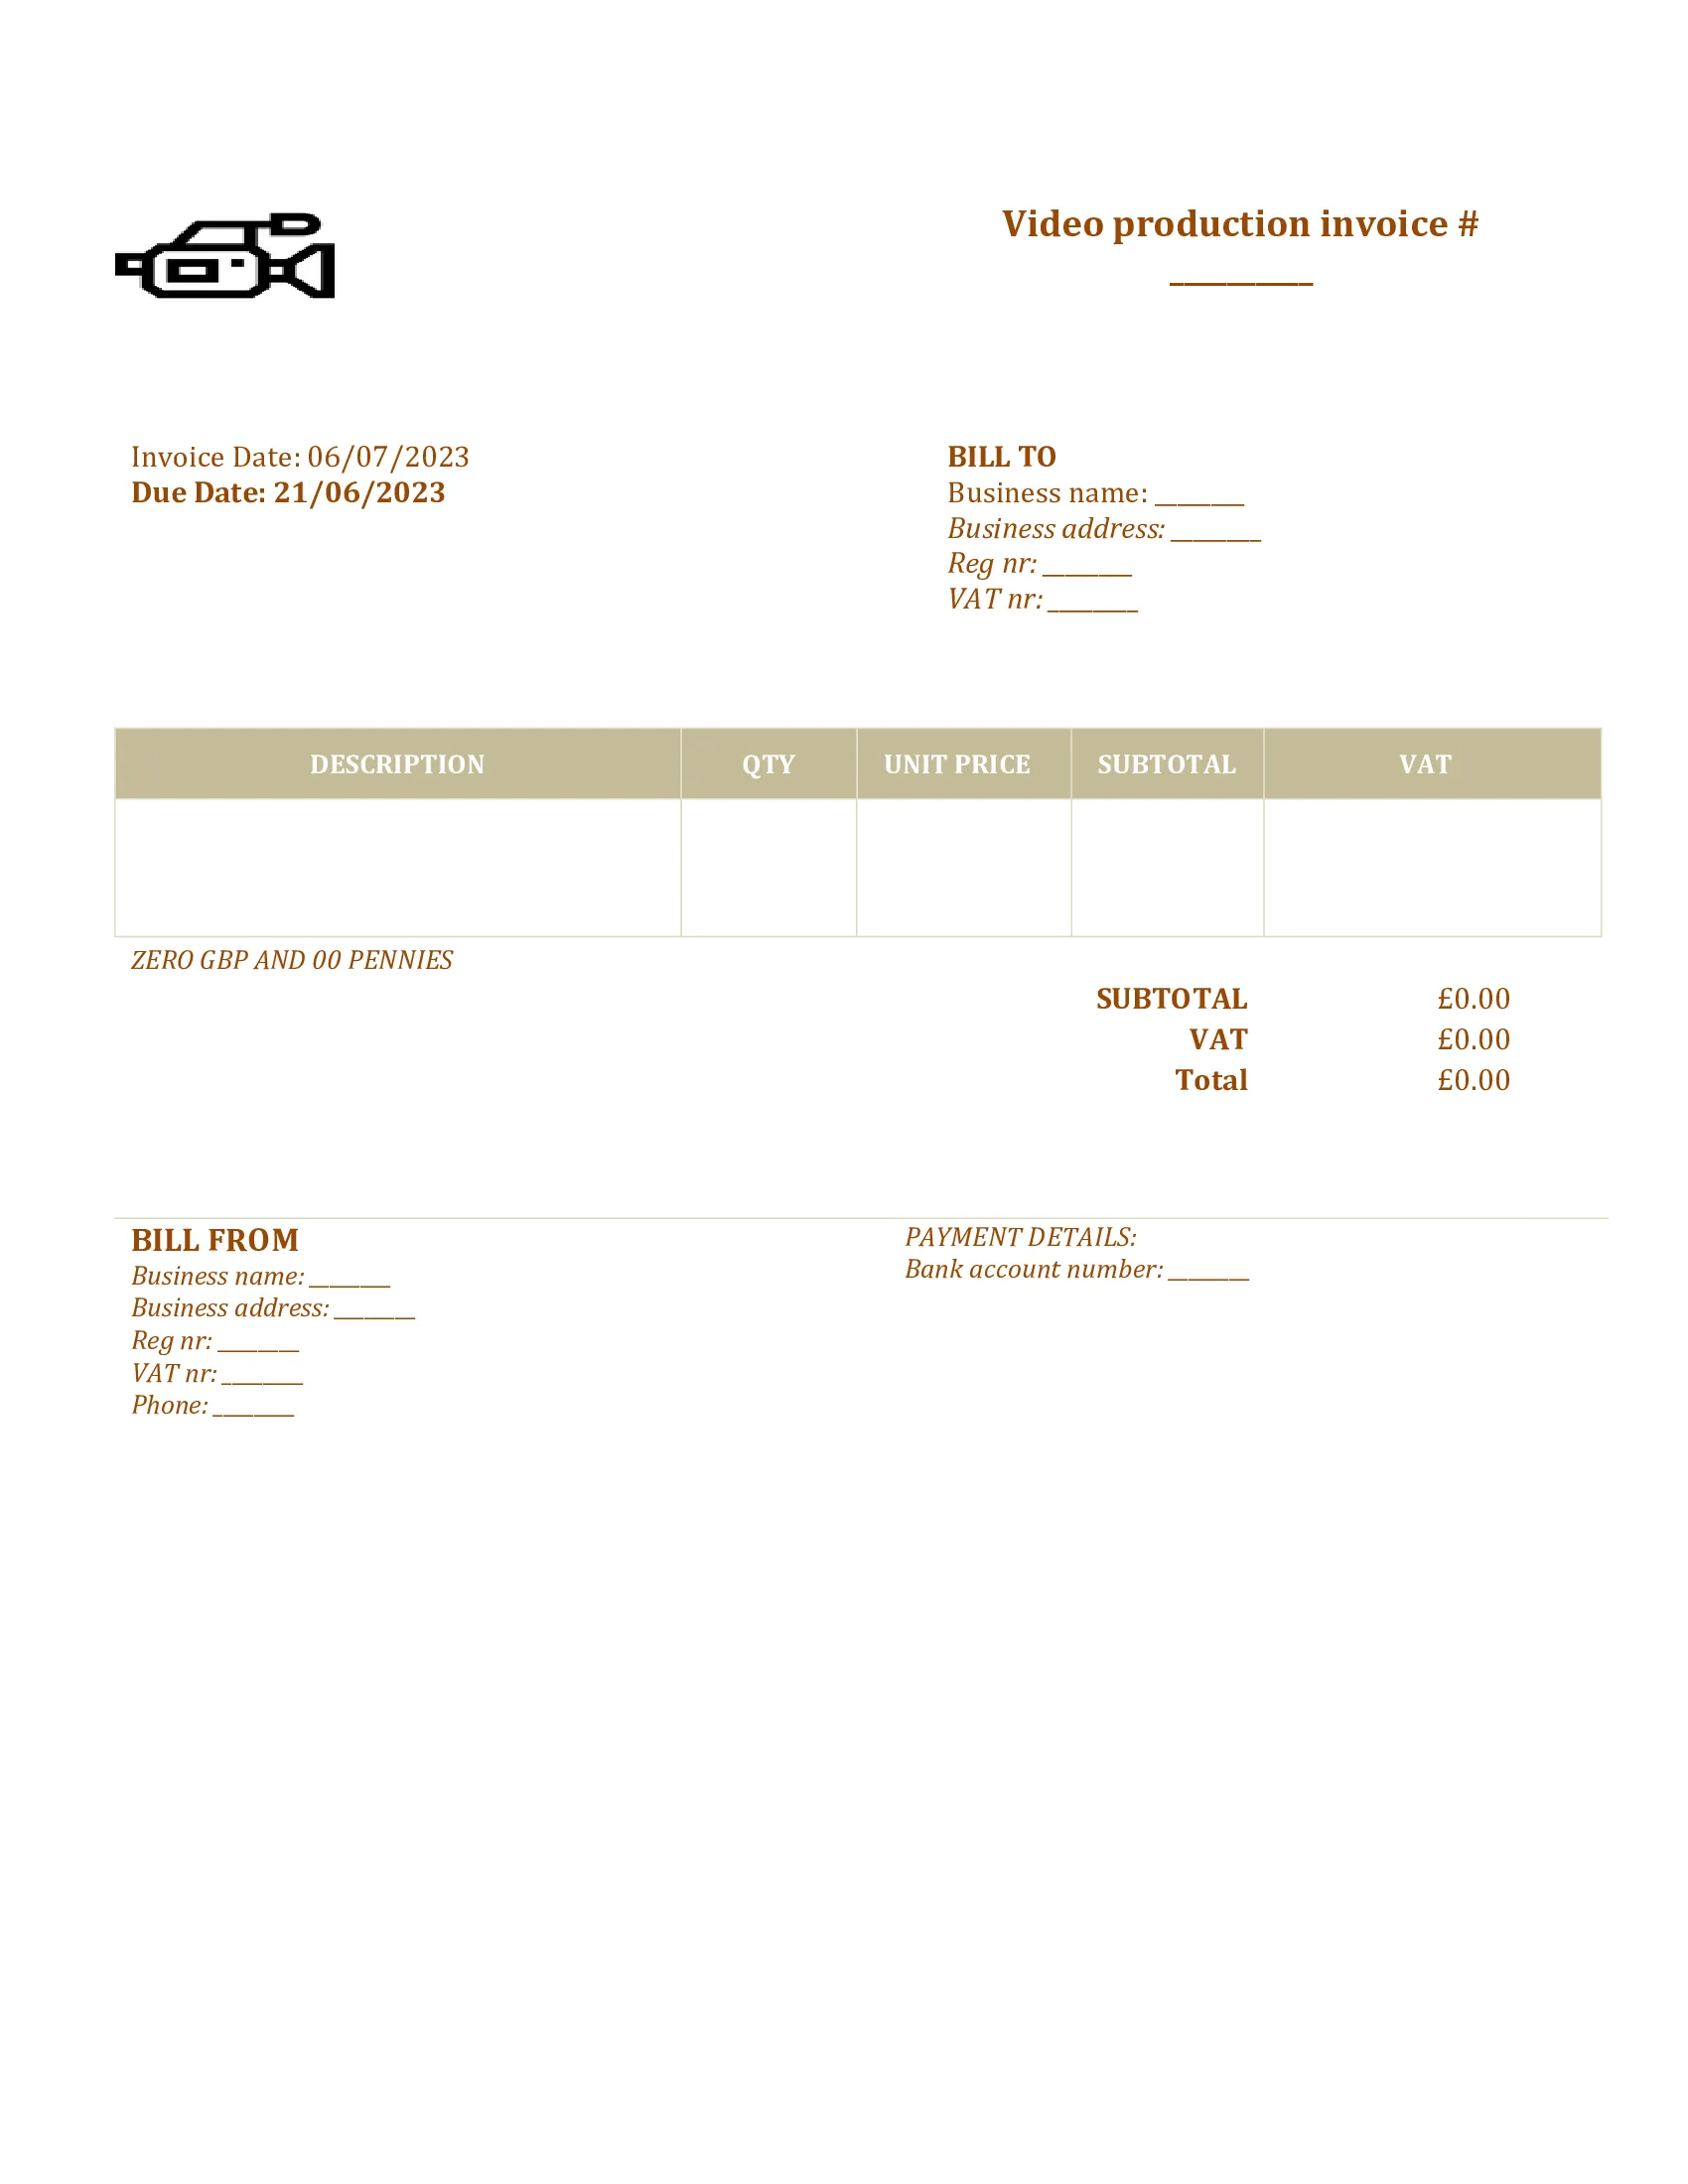 printable video production invoice template UK Word / Google docs